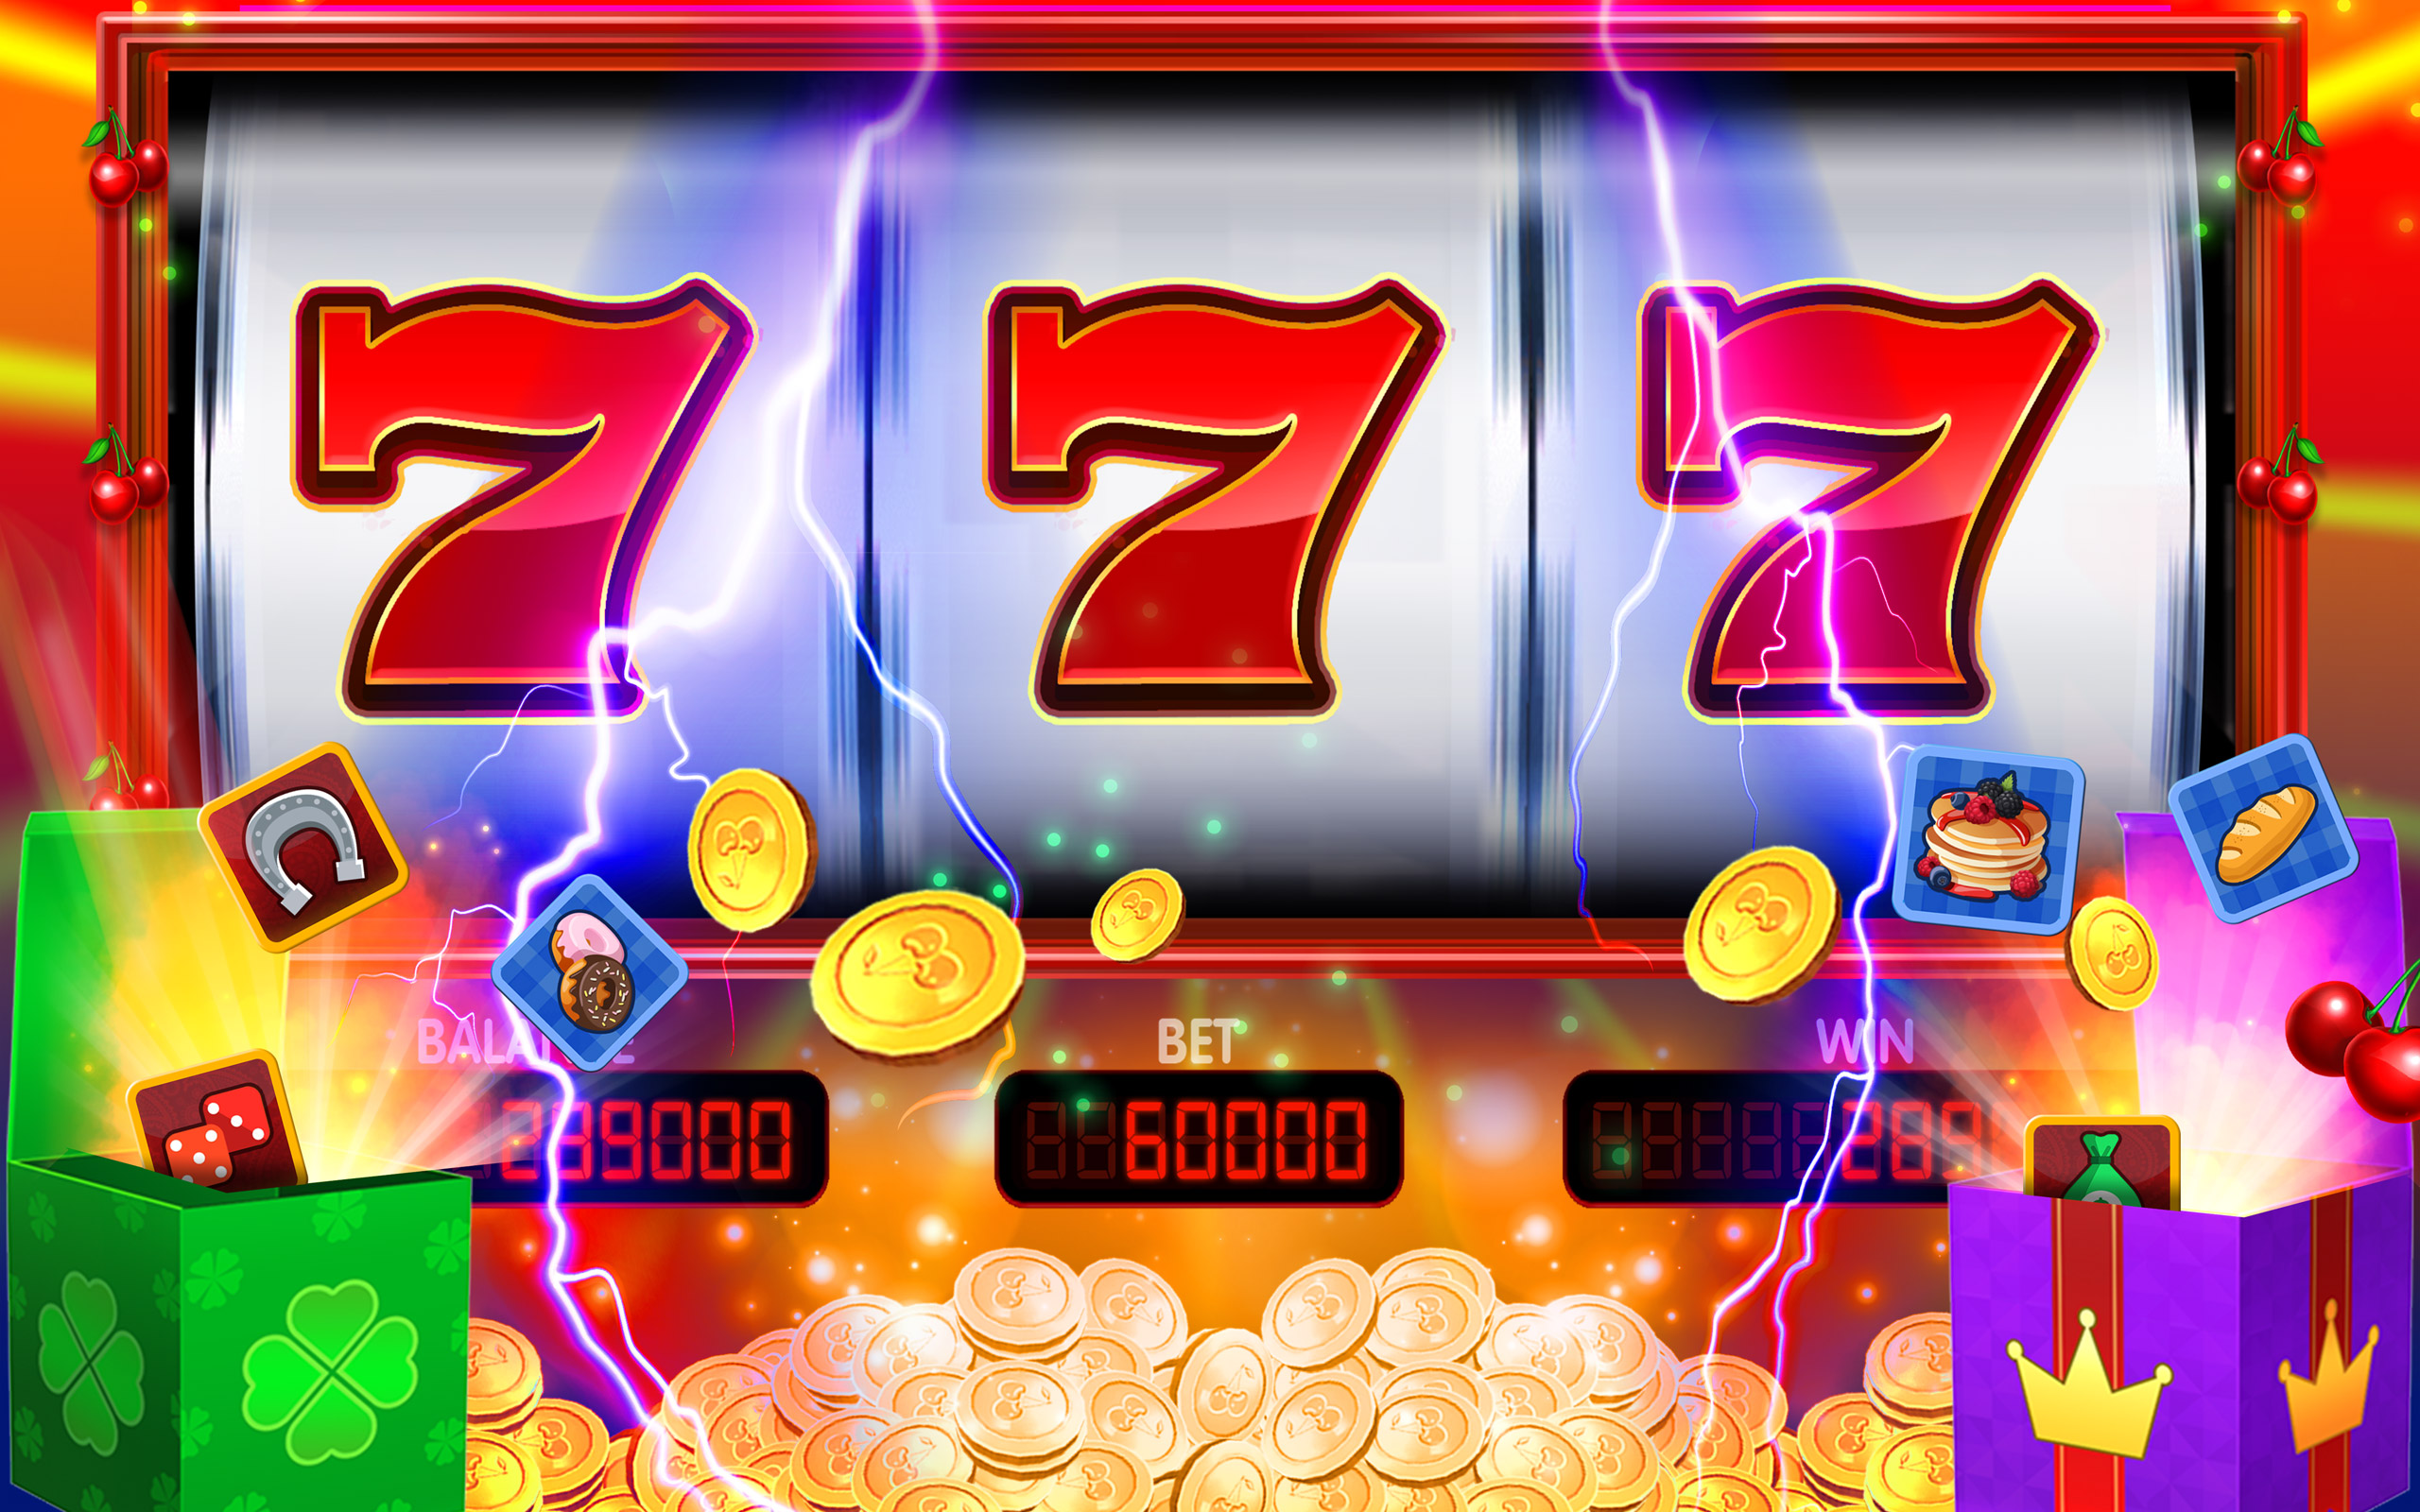 Play Online Slot Games At Mr Green